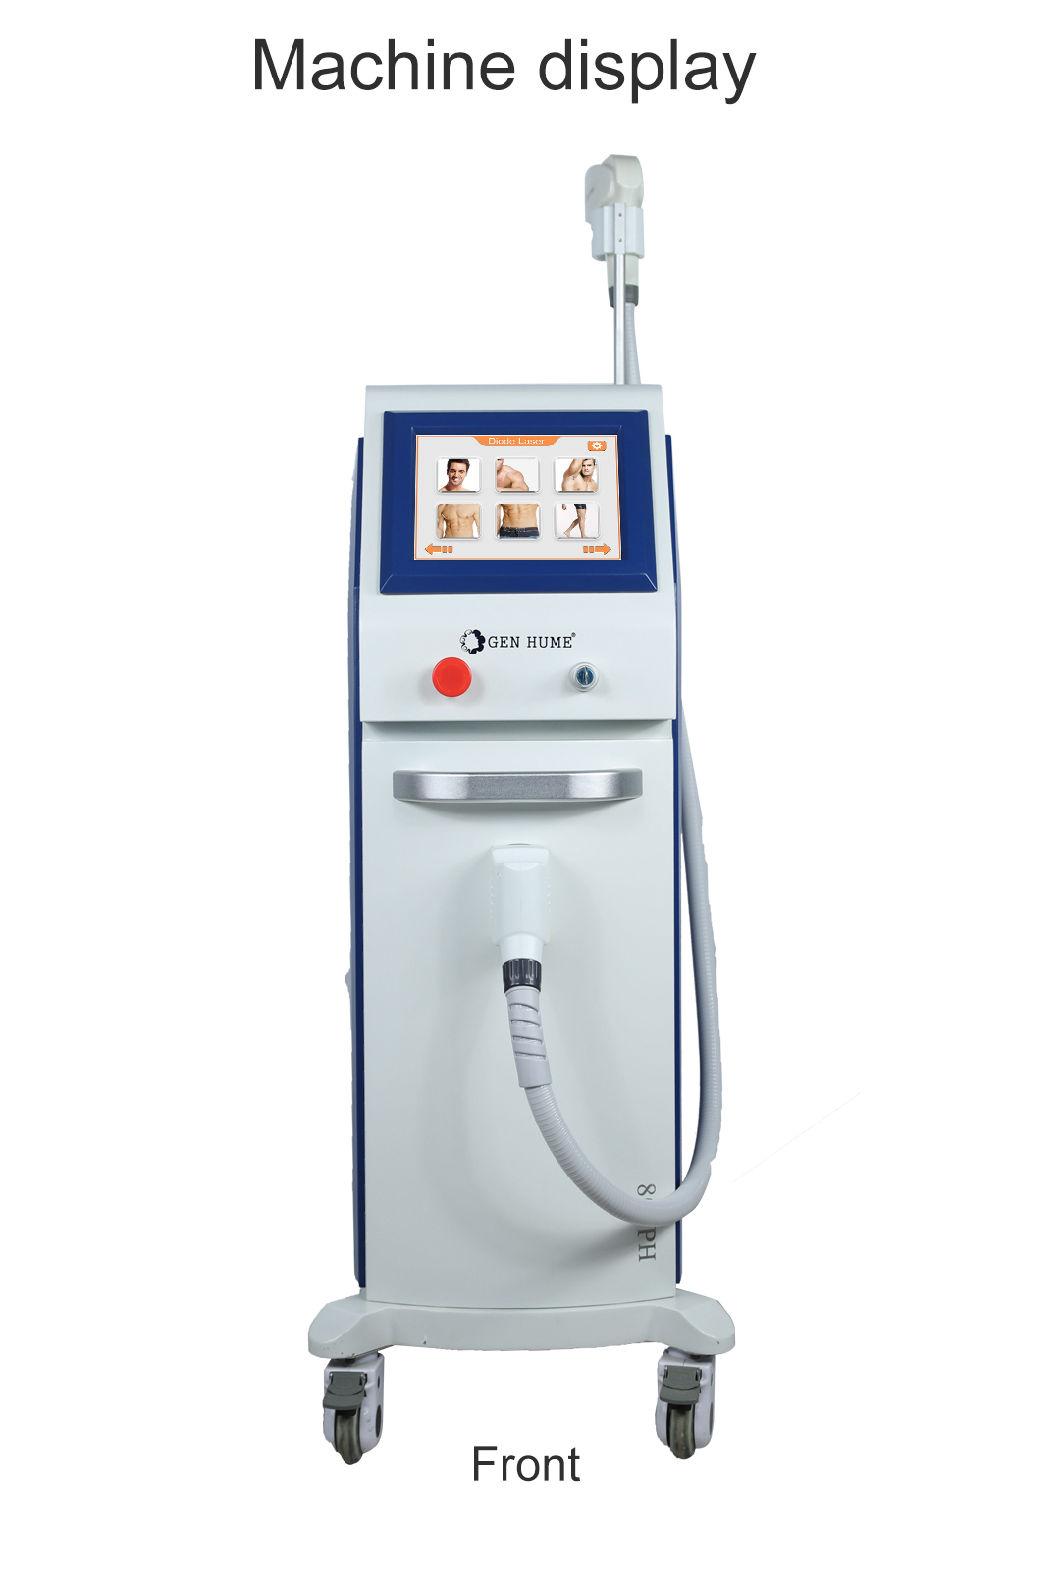 808nm Hair Reduction with Cooling System Laser Diode 808 Nm 808nm Diode Laser for Permanent Hair Removal Beauty Machine